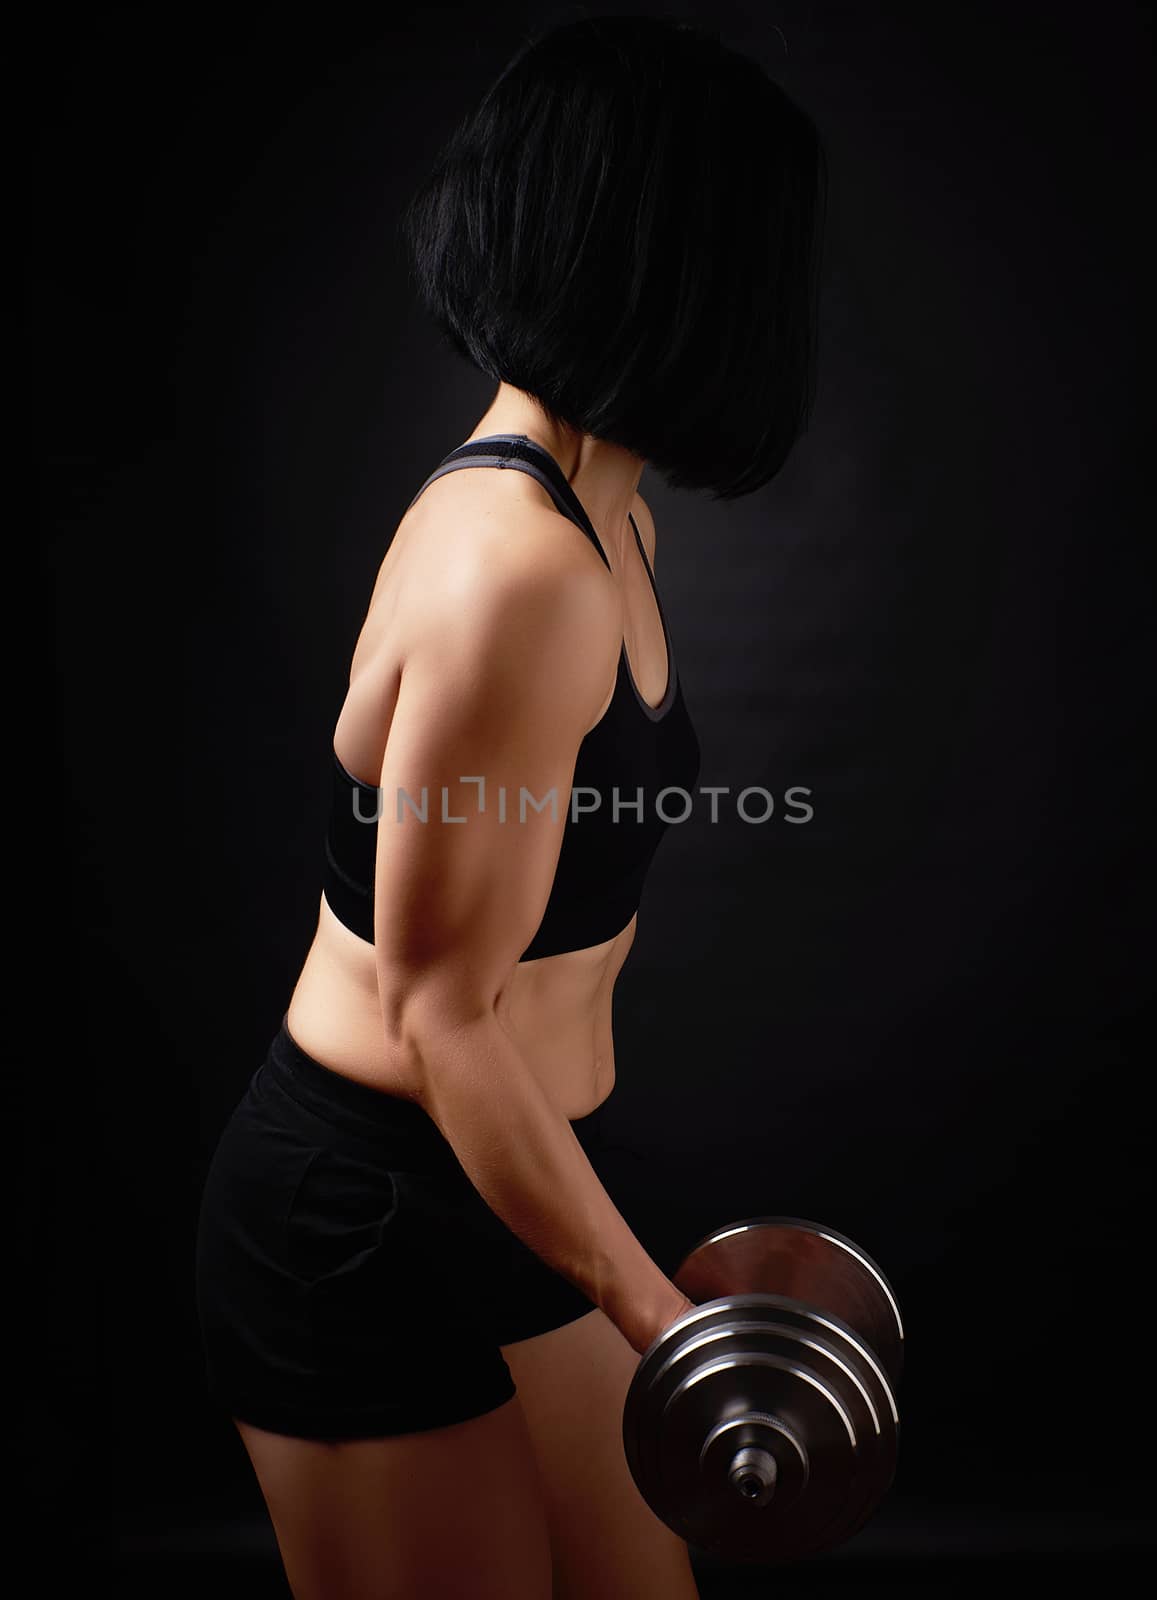 young woman of Caucasian appearance holds steel type-setting dumbbells in her hands, sports training, dark background